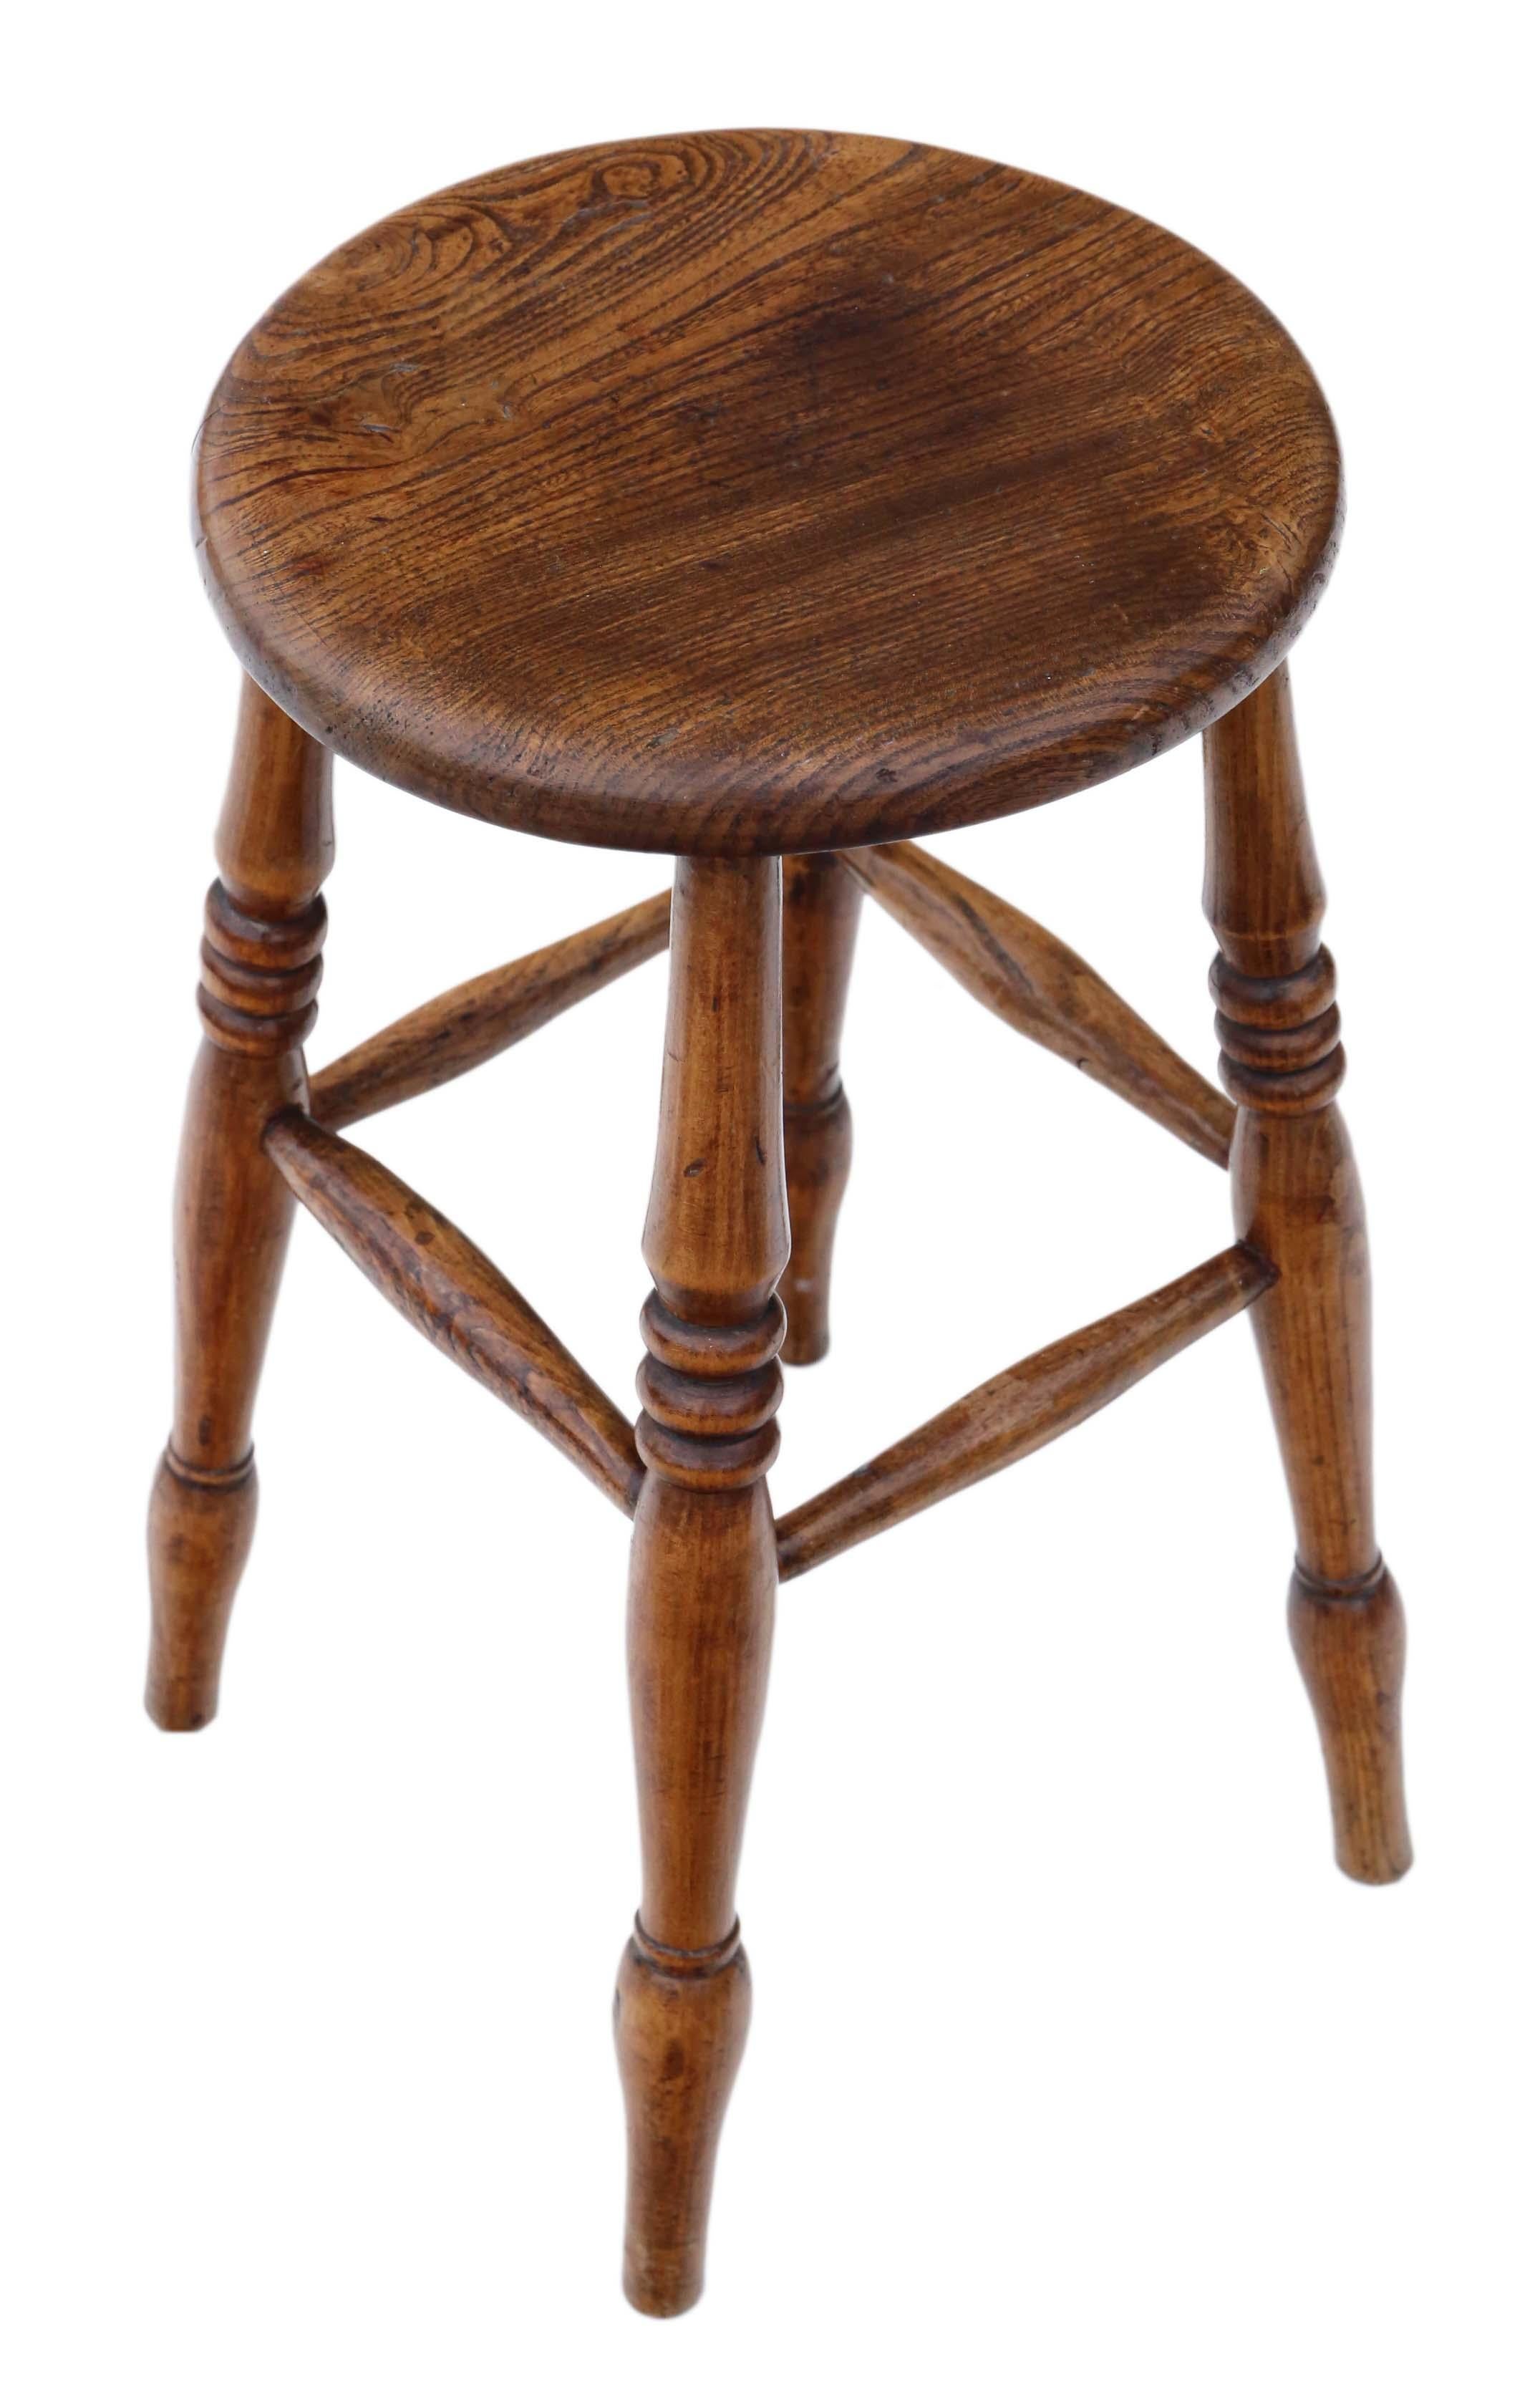 Antique quality Victorian 19th century elm stool.
Quality, decorative and attractive, strong with no loose joints or wobbles. No woodworm.
Would look amazing in the right location. Full of age, character and charm.
Overall maximum